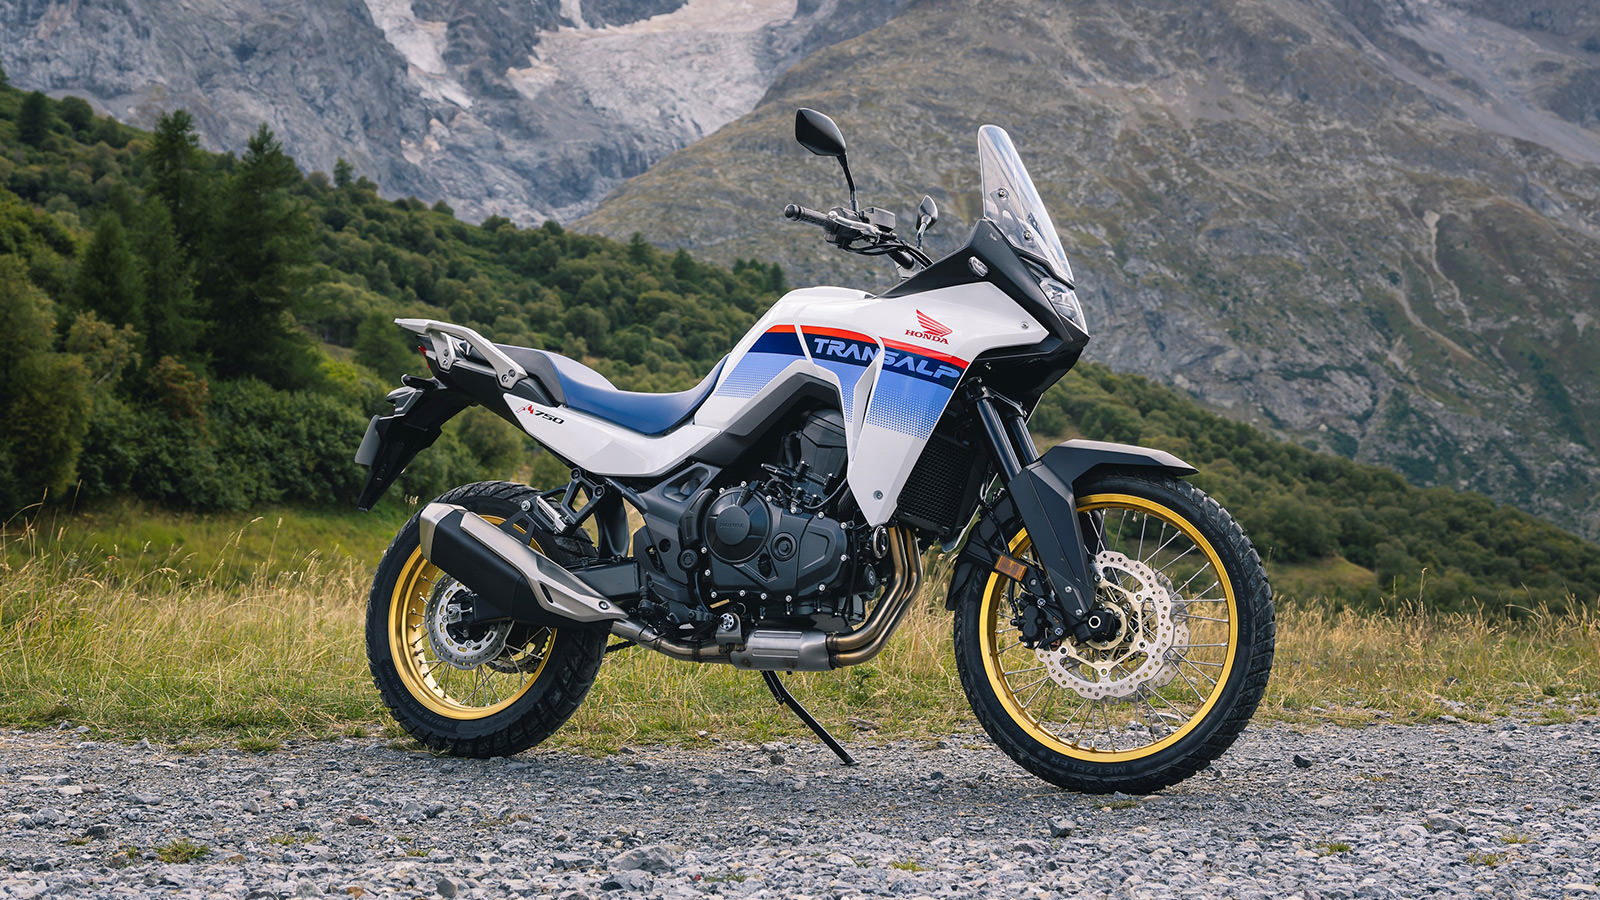 2023 Honda XL750 Transalp Is A Throwback With A New 755cc ParallelTwin